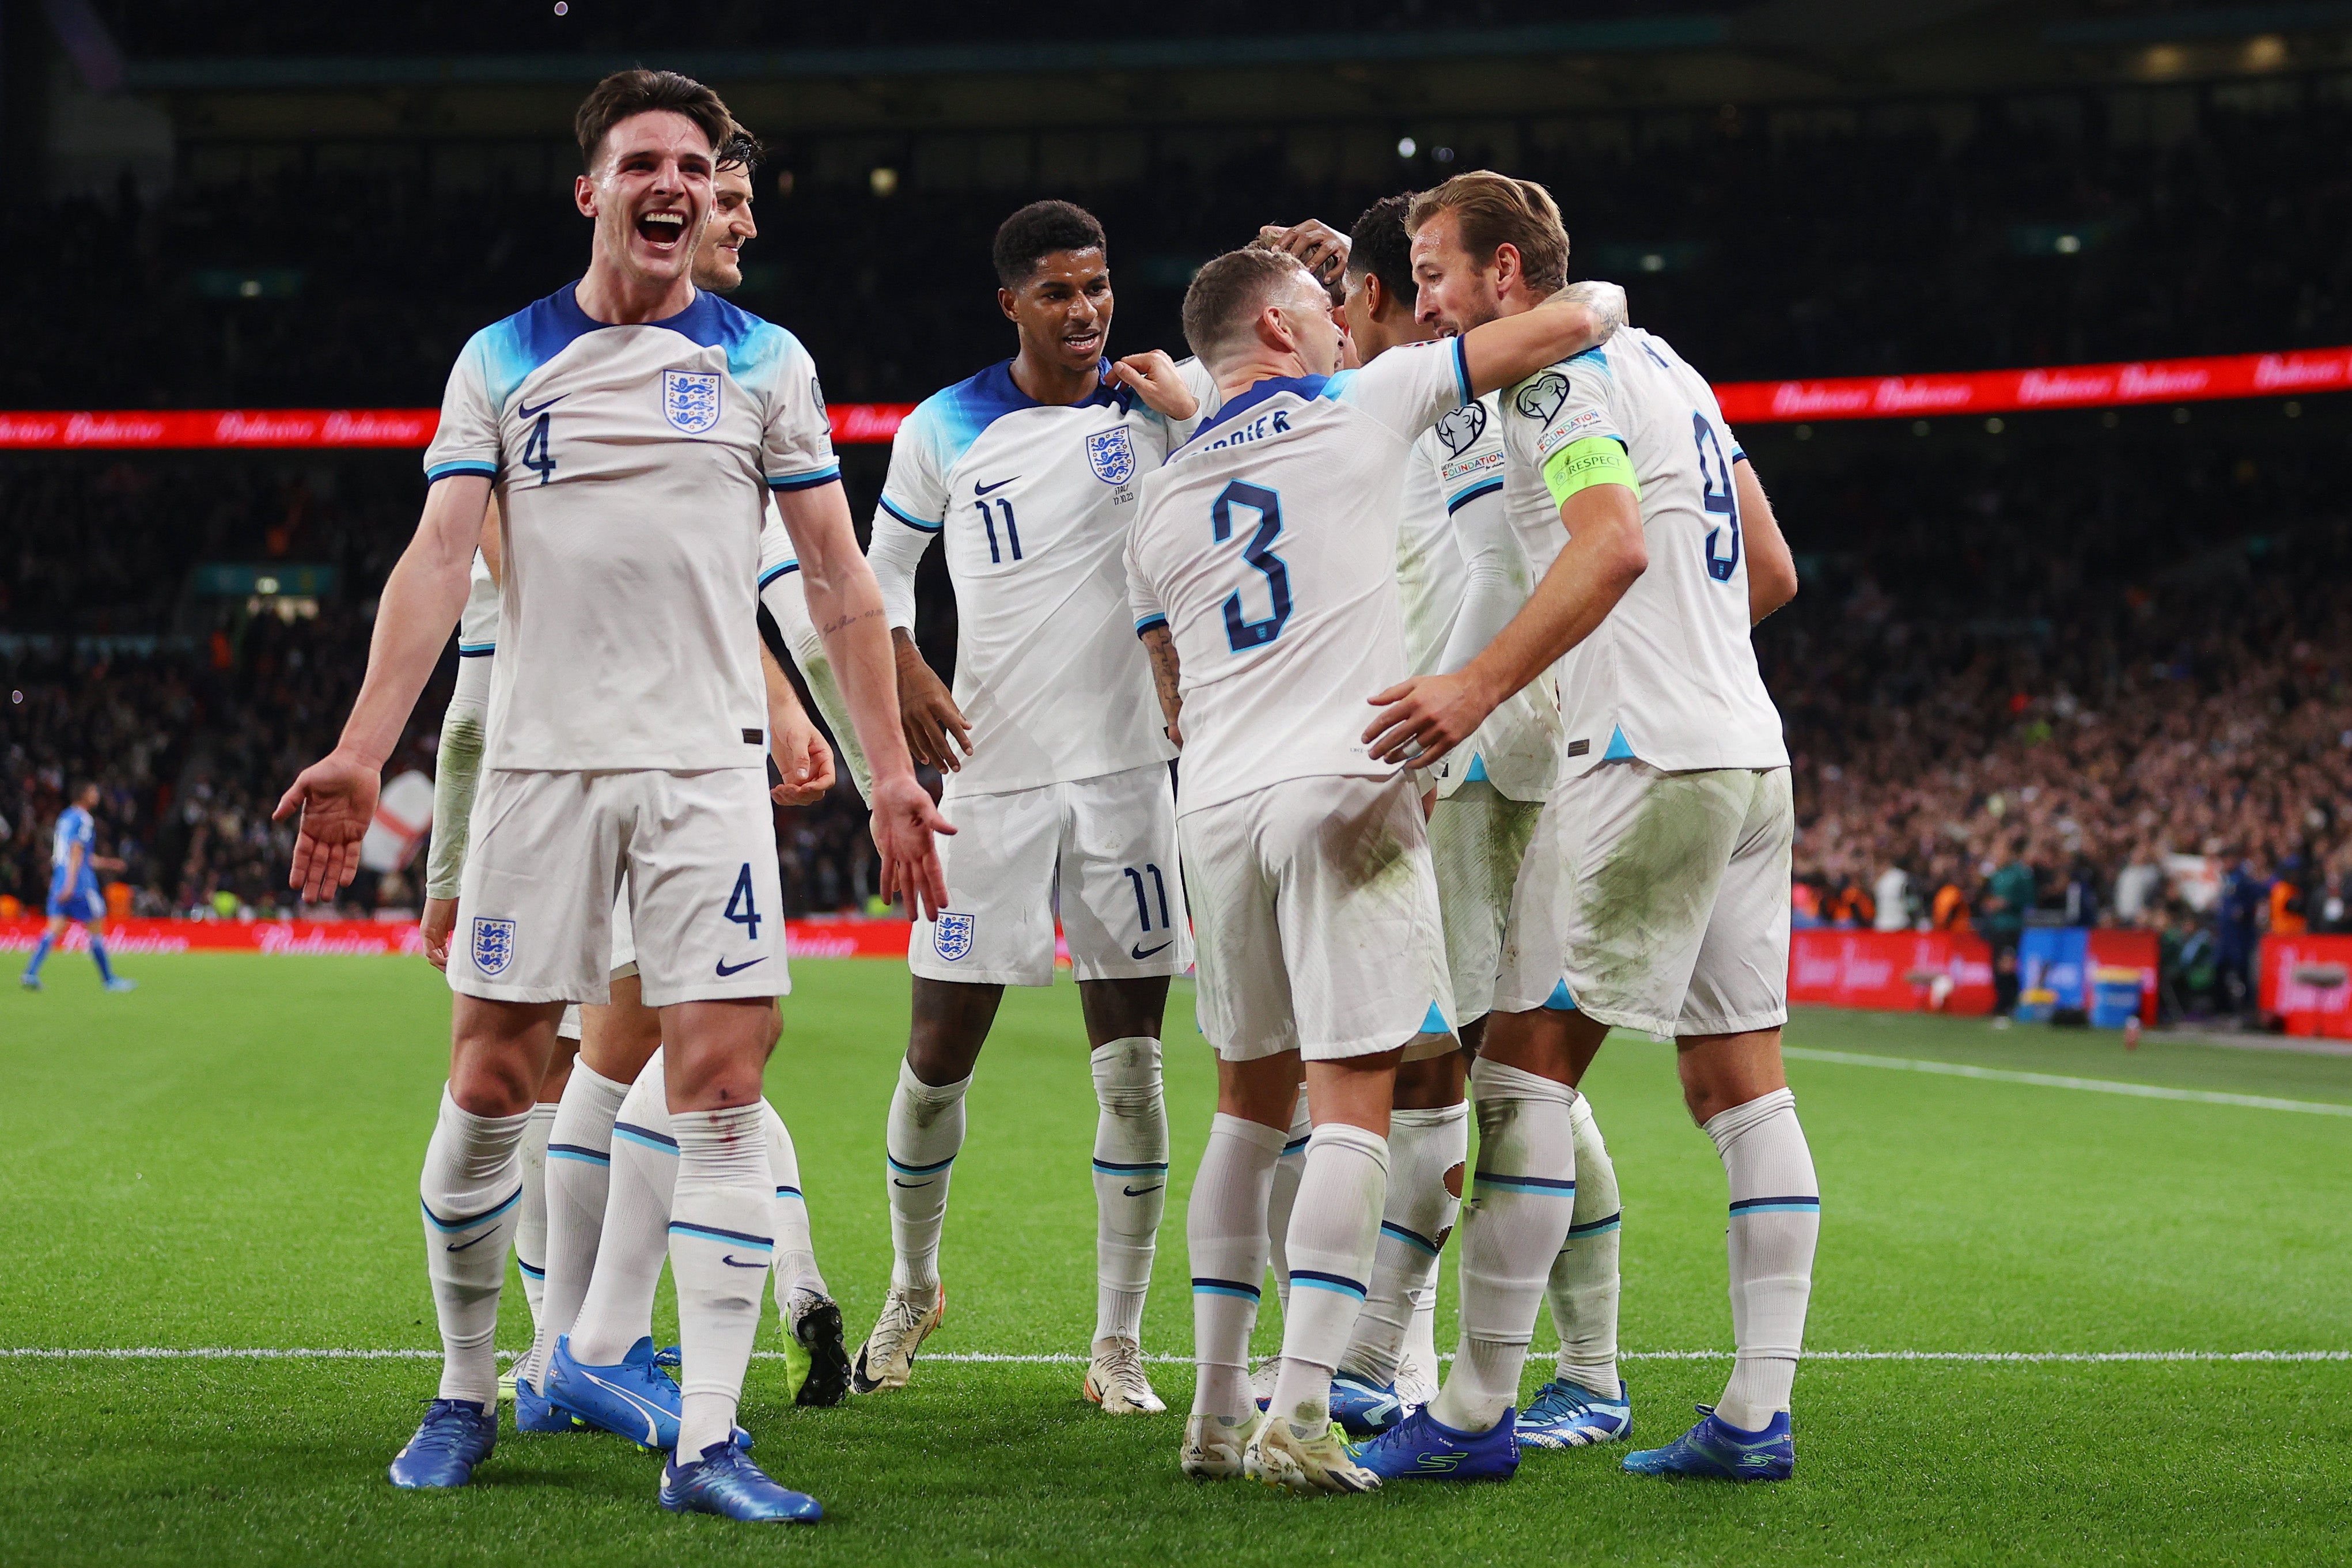 After losing to France in the most recent World Cup, have England learned how to get over the line against strong opposition?